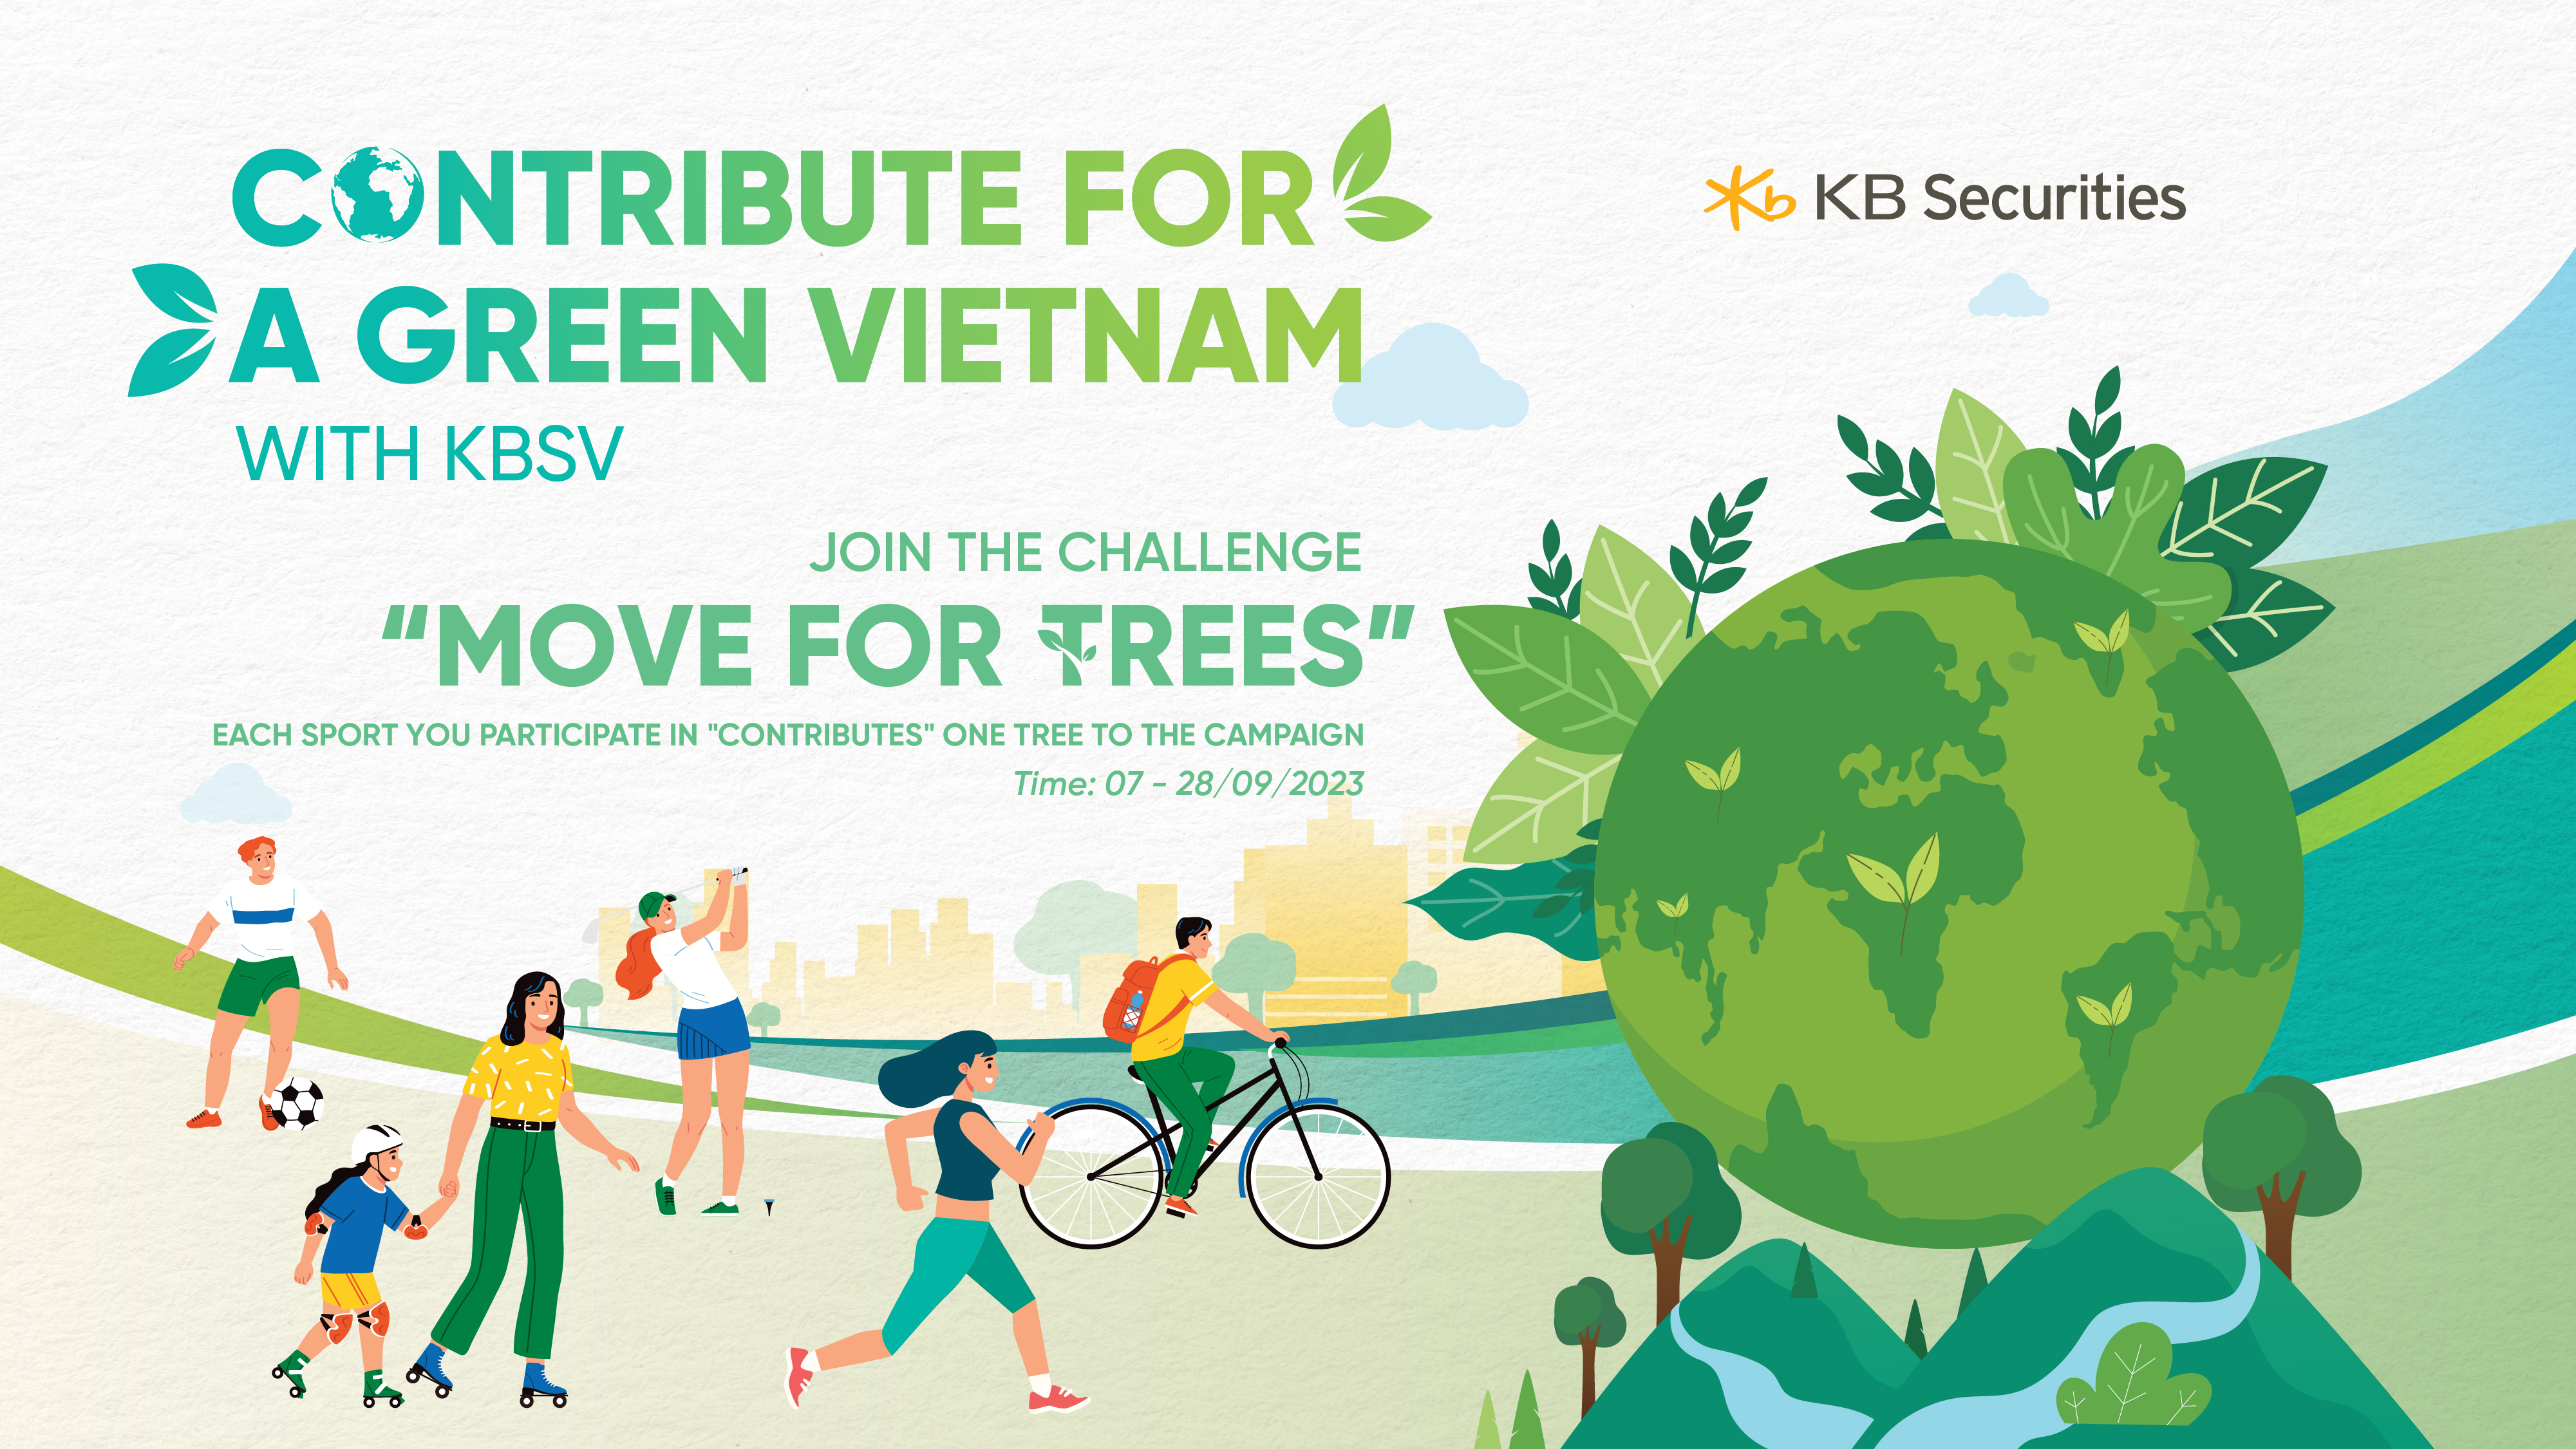 KB Securities Vietnam officially launched the Contribute for a Green Vietnam campaign